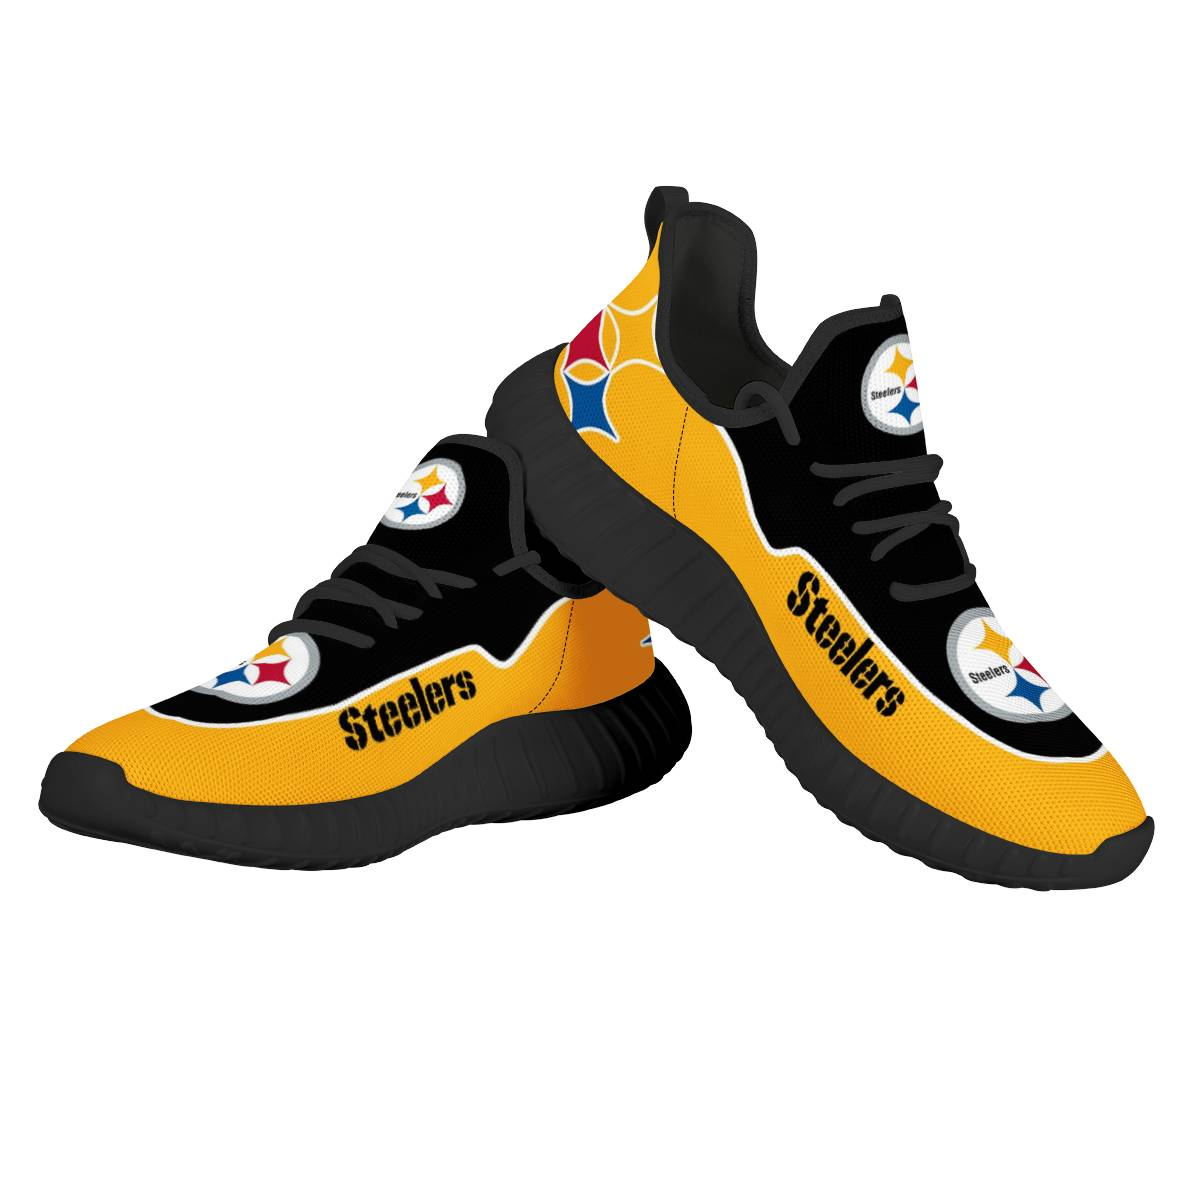 Women's Pittsburgh Steelers Mesh Knit Sneakers/Shoes 007